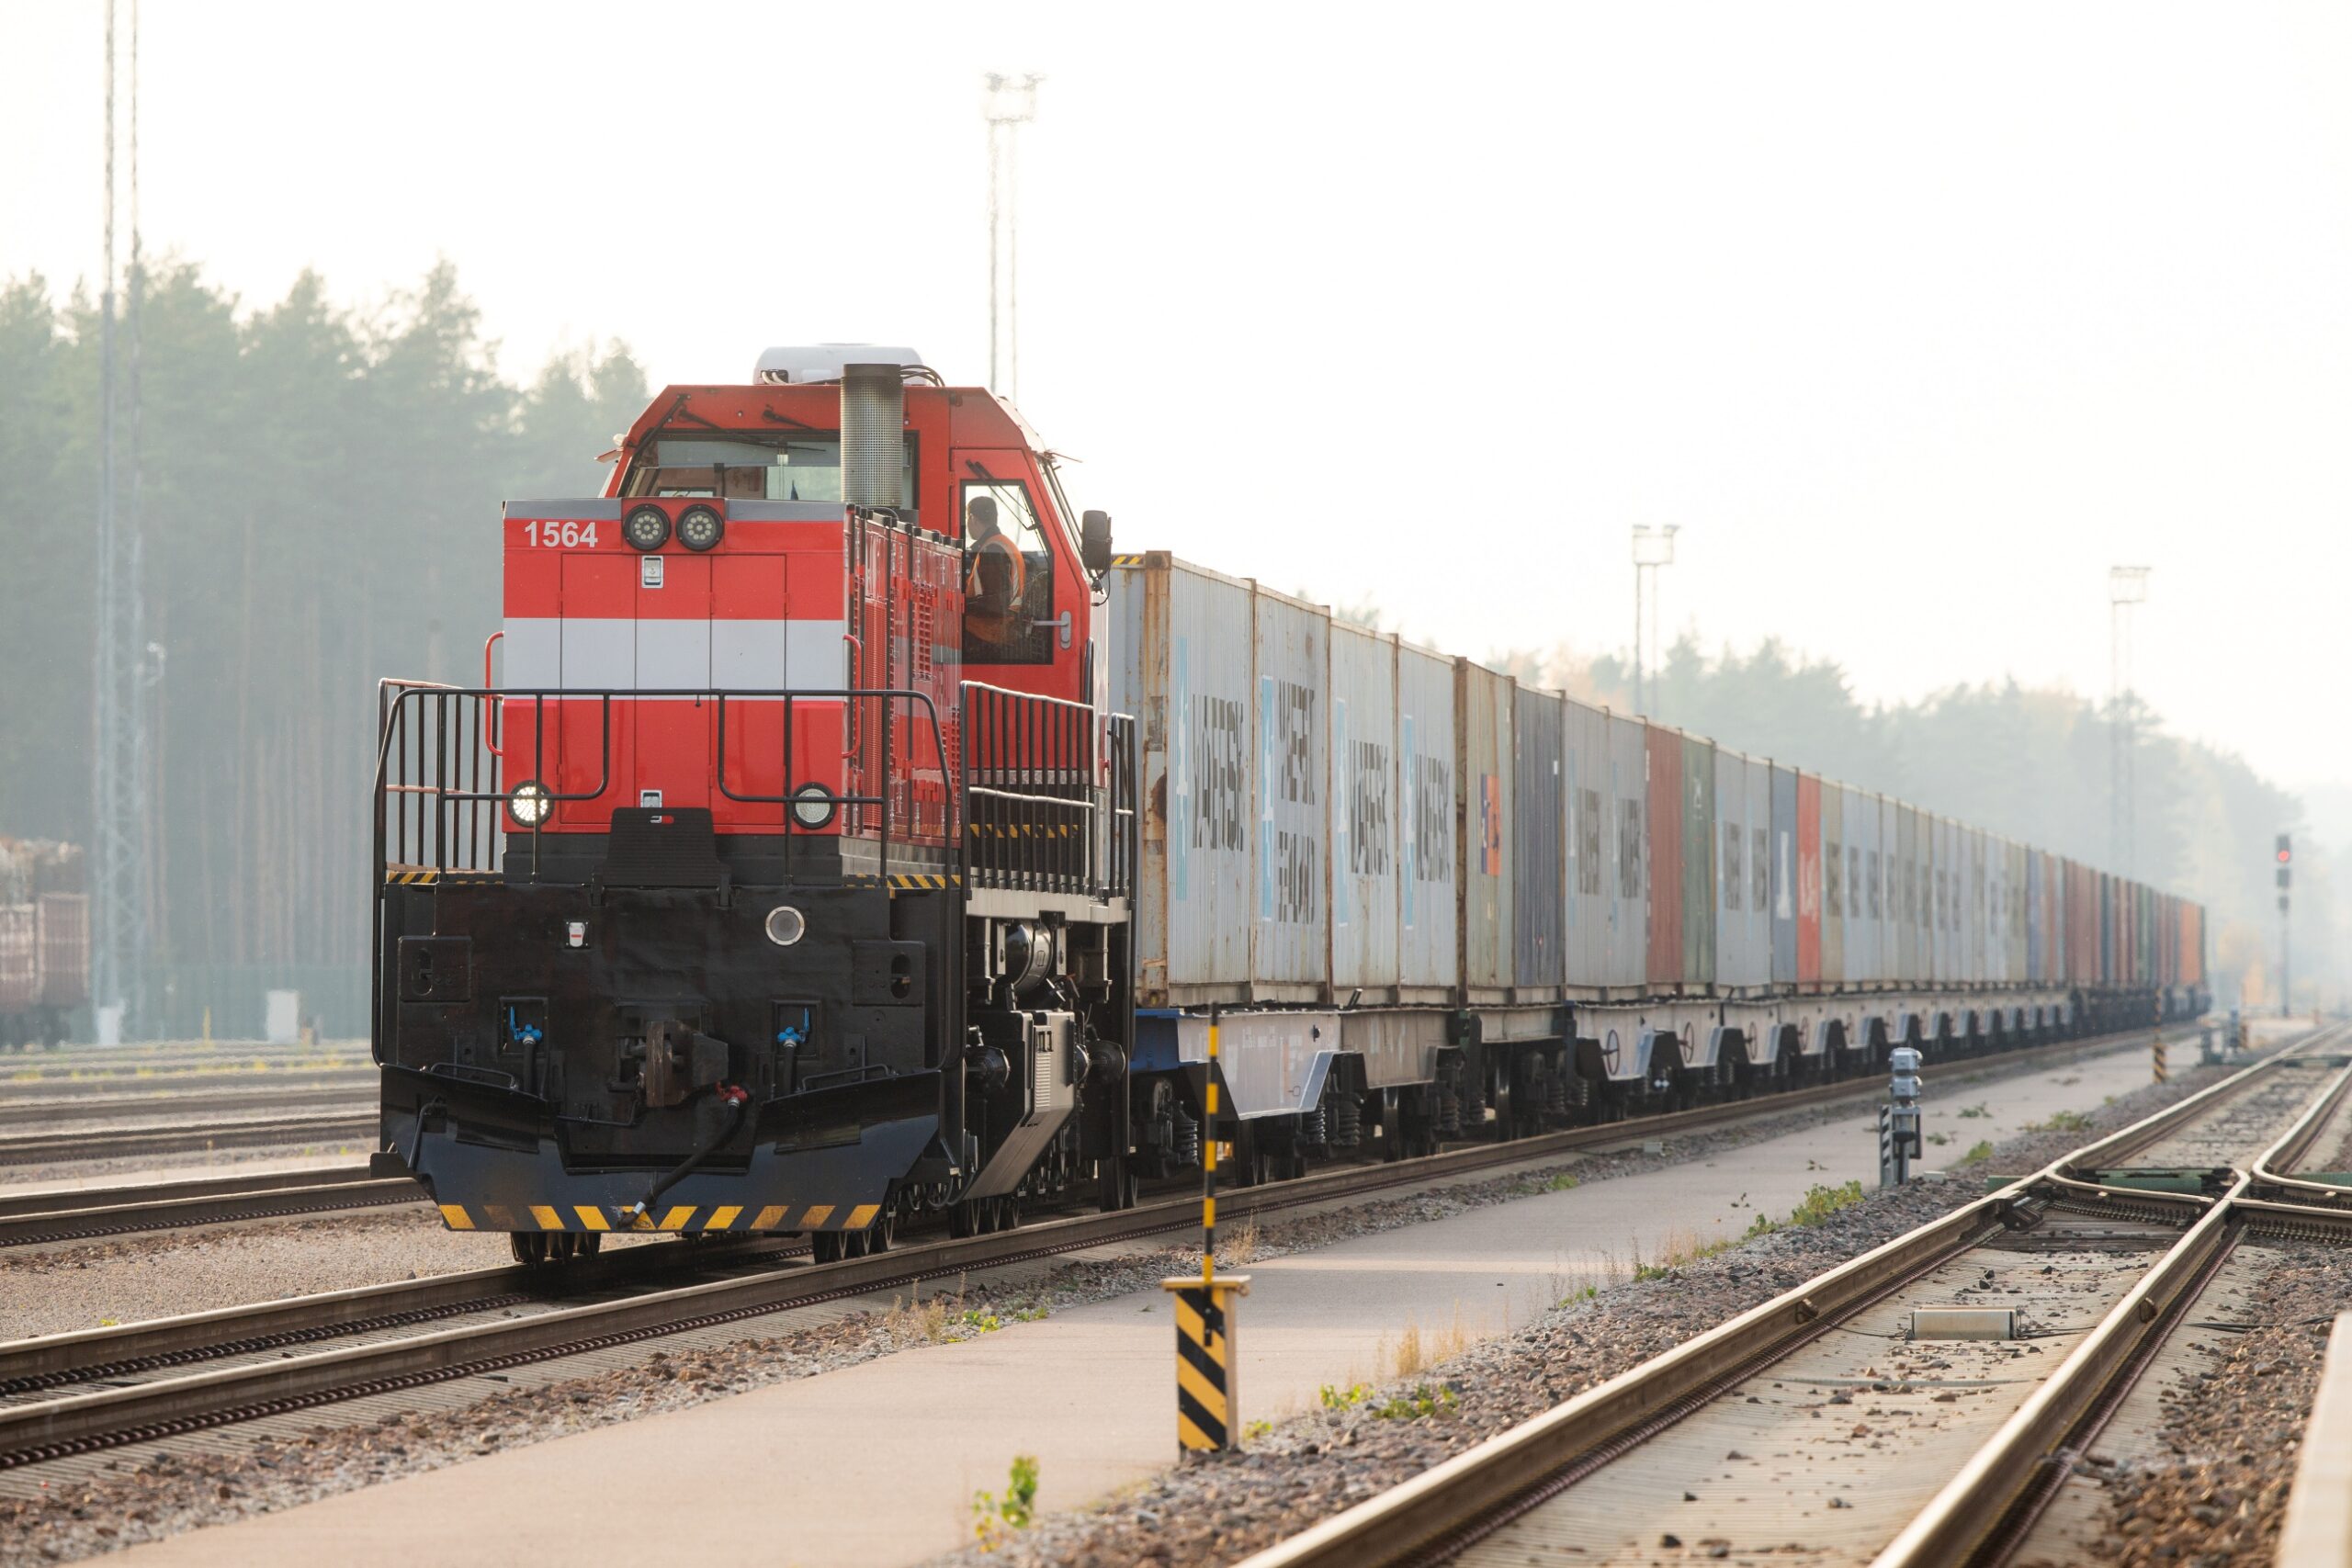 Container trains are becoming more popular